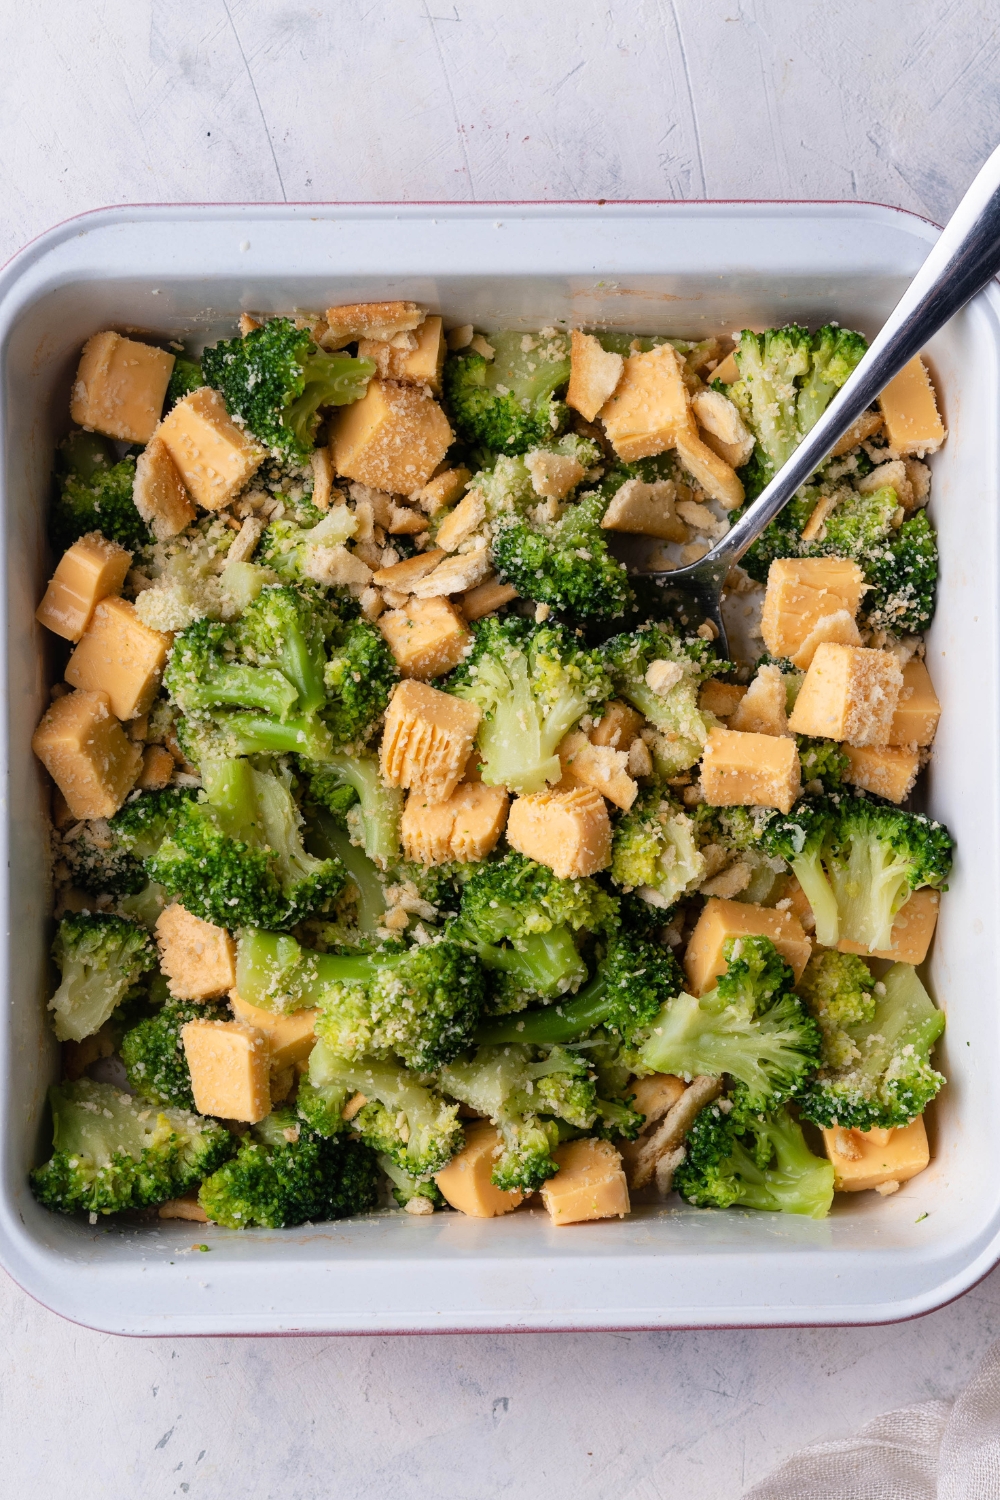 An overhead view of a casserole dish with broccoli, cubed cheese, and crumbled crackers mixed together.